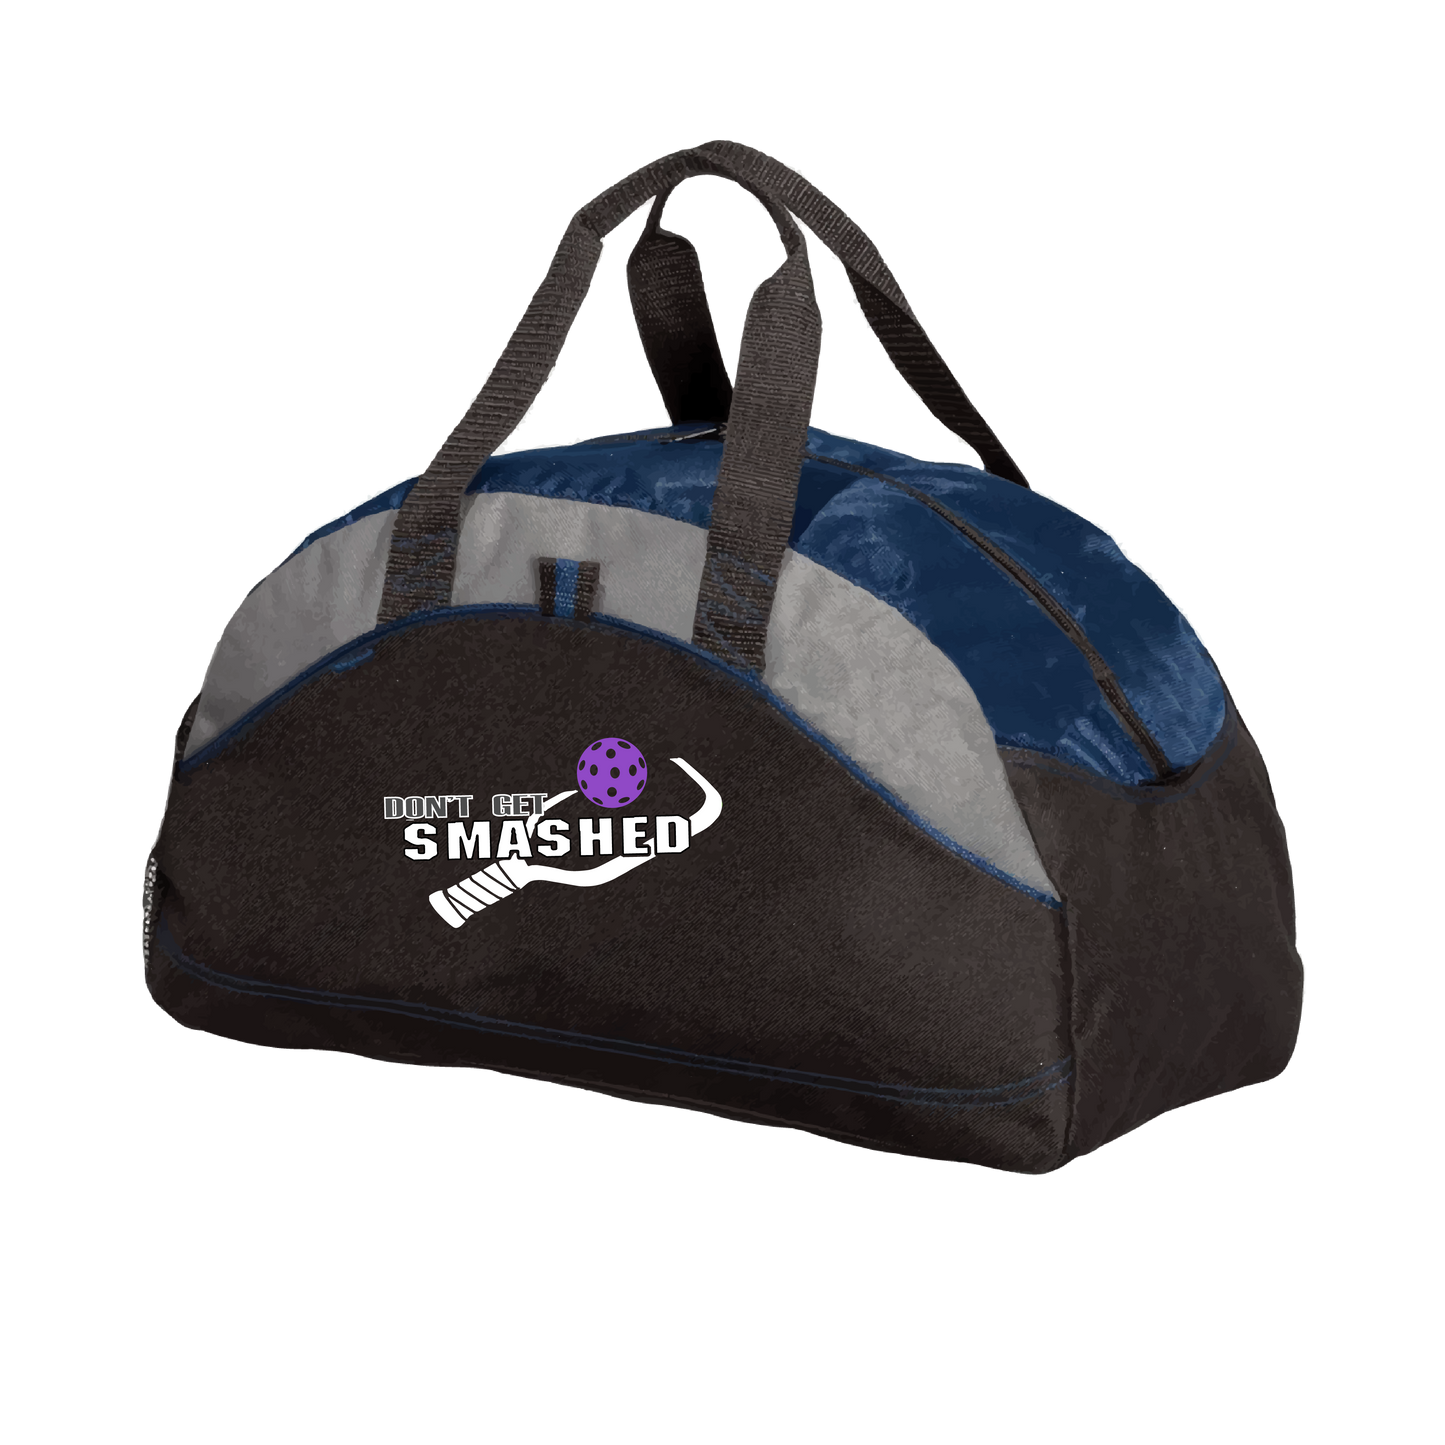 Don't Get Smashed (Customizable Ball Color) | Pickleball Sports Duffel | Medium Size Court Bag